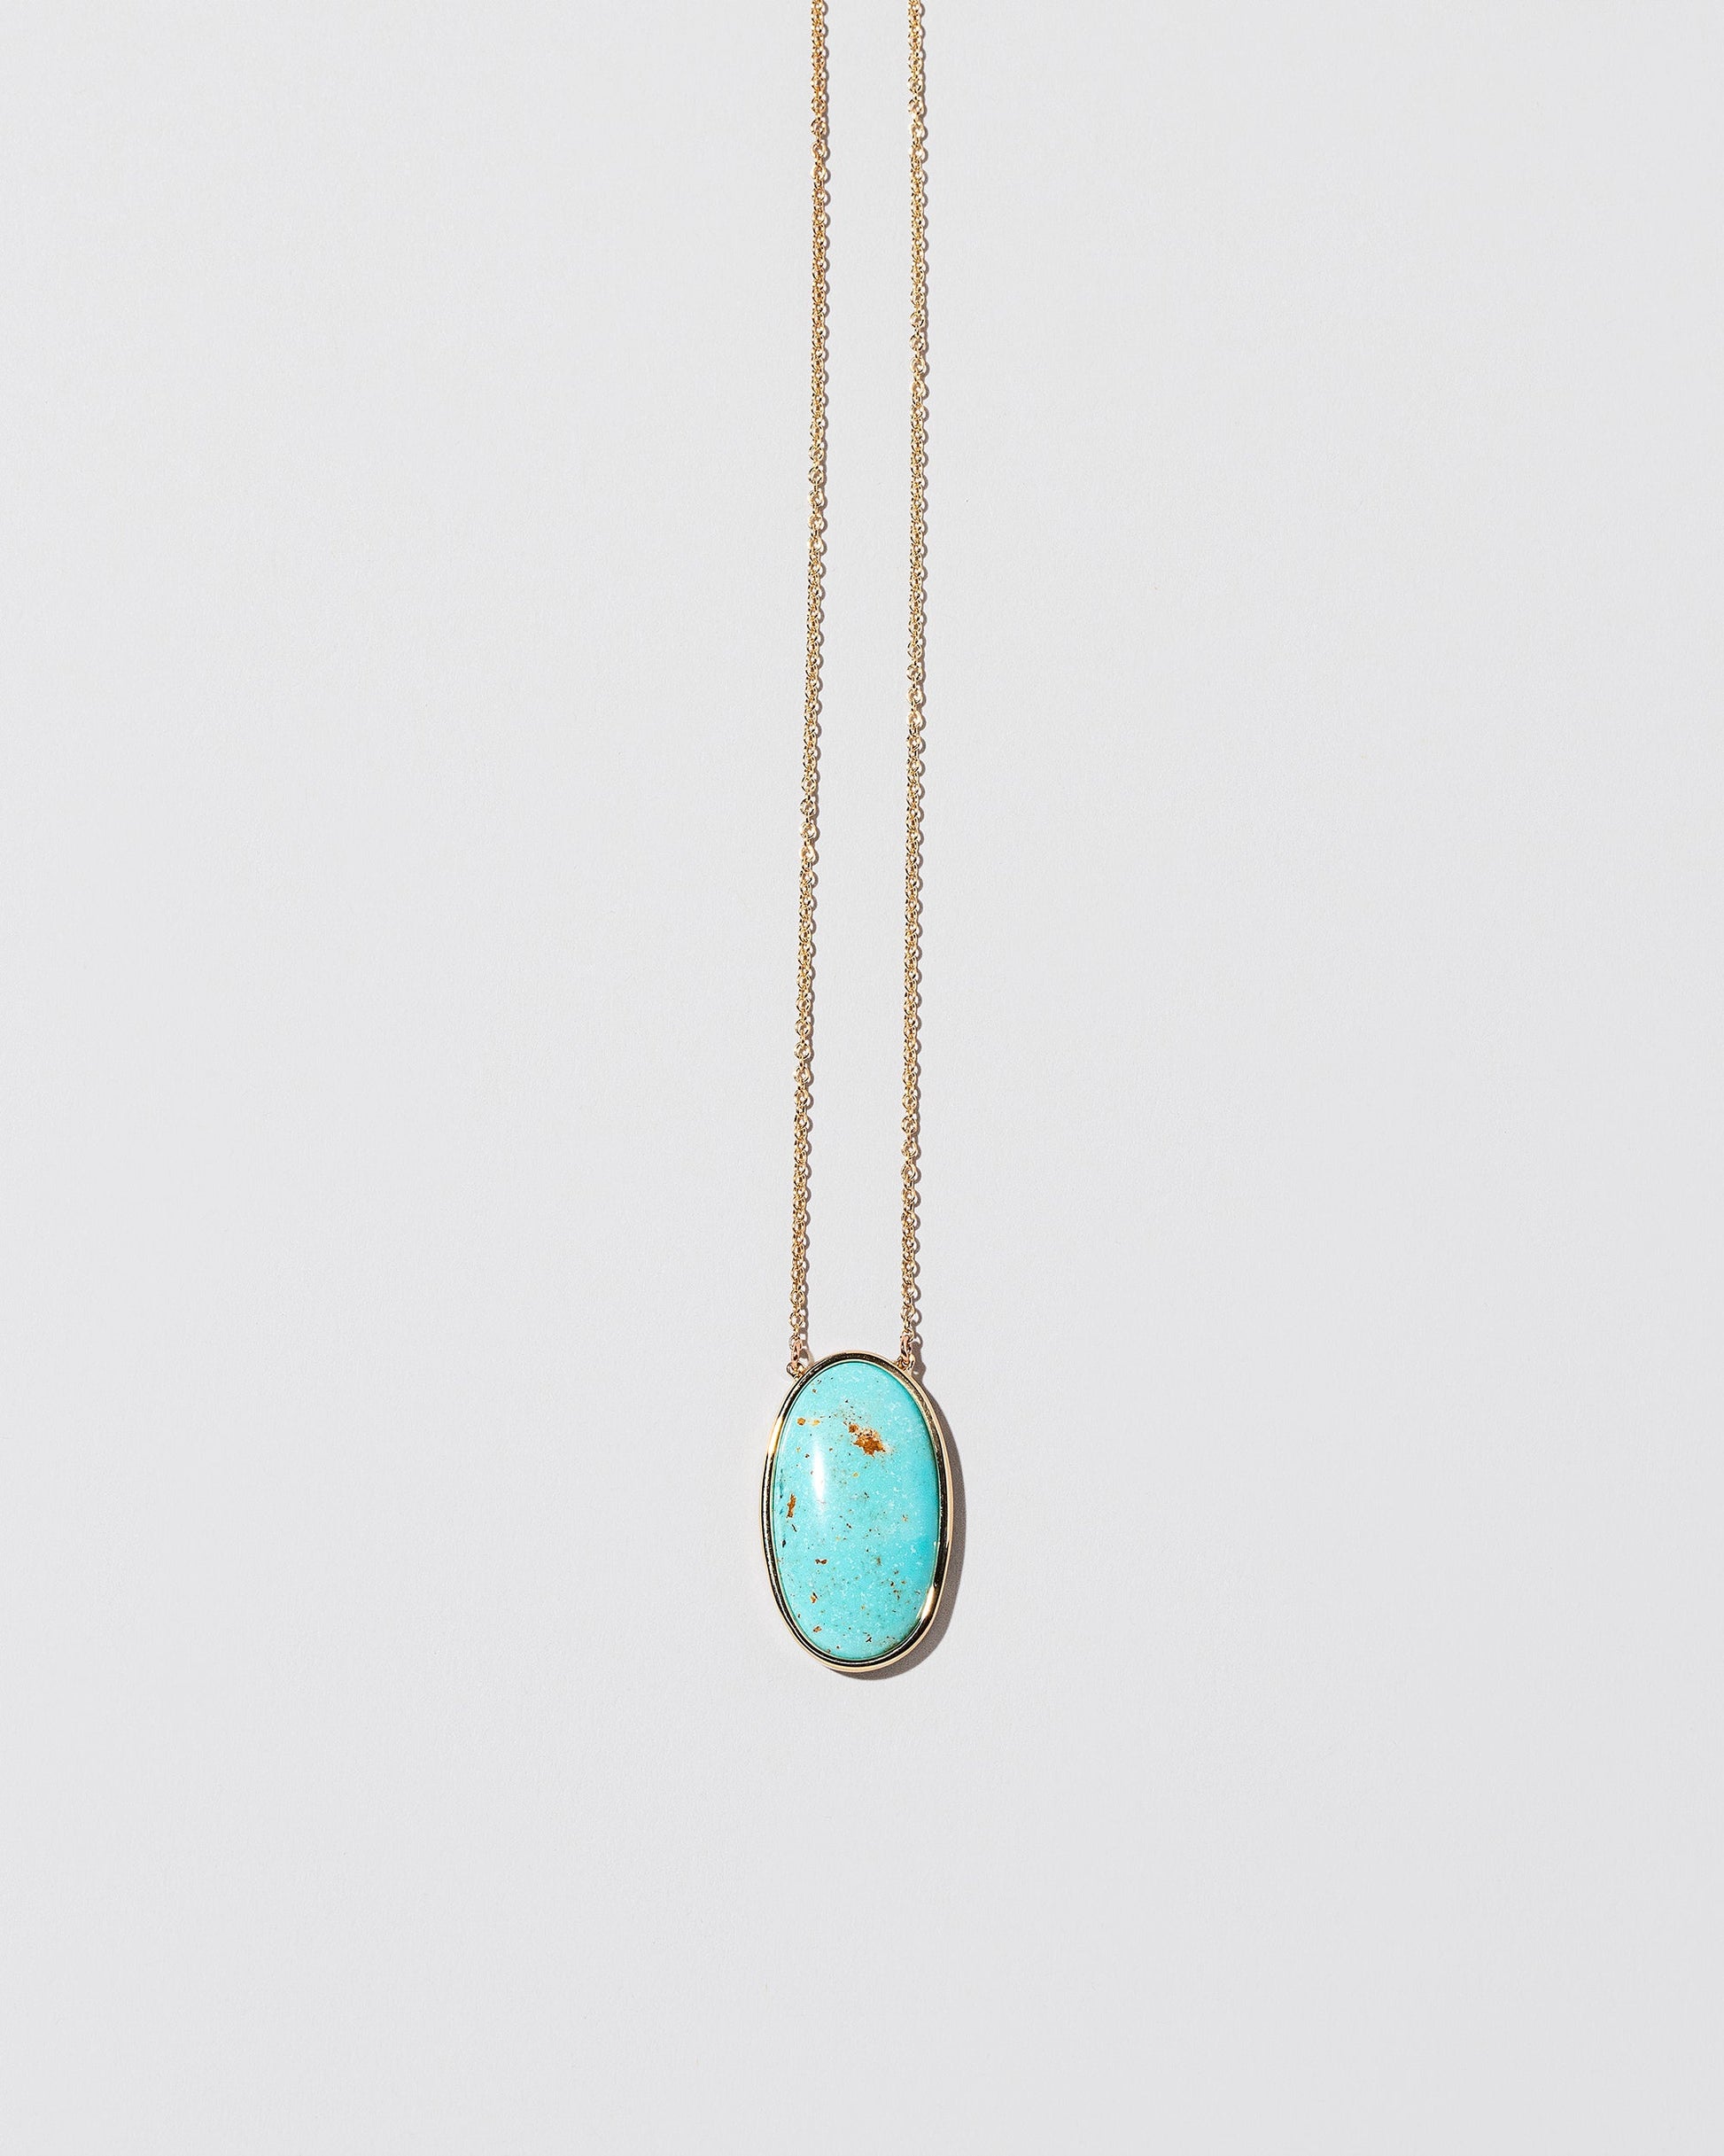  Turquoise Necklace on light color background.